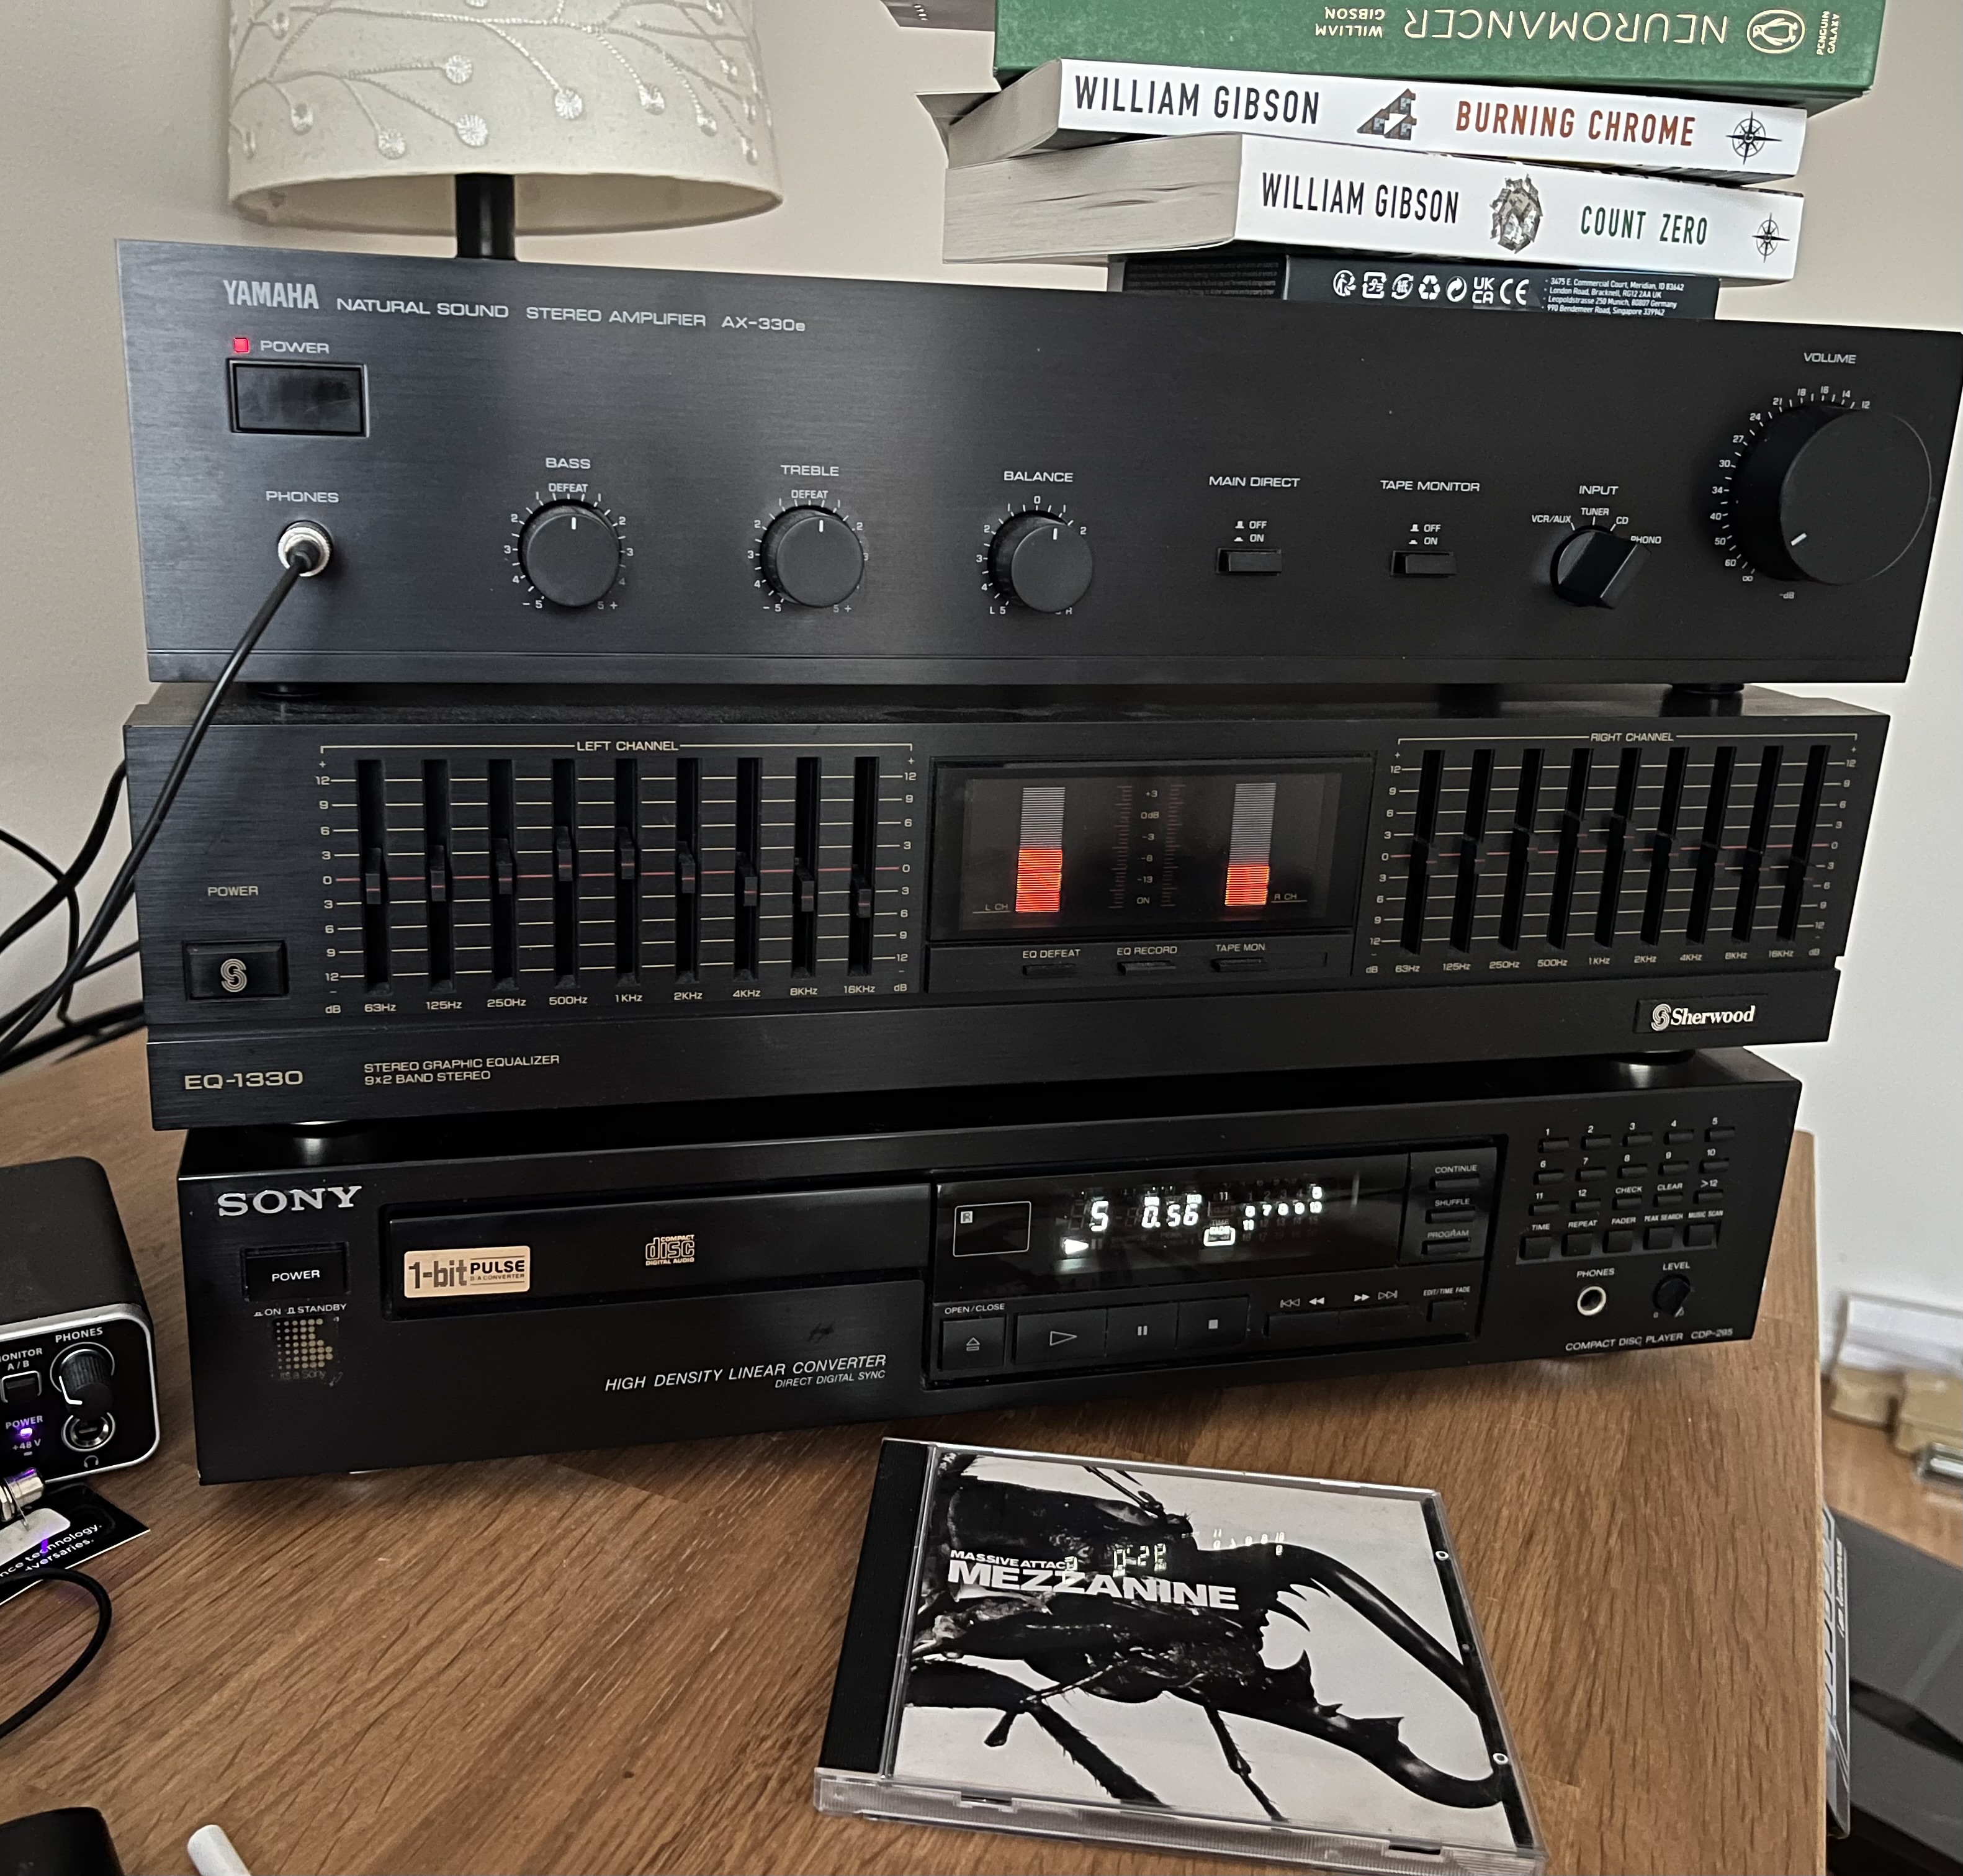 A stack of HiFi equipment, on a desk. The top of the stack has three books on top - Neuromancer, Burning Chrome and Count Zero by William Gibson. The top unit is a Yamaha AX-330e, which is powered on. It has a volume knob, input selection dial, main direct and tape monitor switch, and 3 smaller dials labelled Bass, Treble and Balance. Headphones are plugged in. Below it, is the EQ-1330 previously mentioned in this post, and it's powered on and shows two VU meters illuminated. Below this, is the Sony CD-295, playing track 5 of Mezzanine by Massive Attack. The CD case for Mezzanine is in front of the CD player.